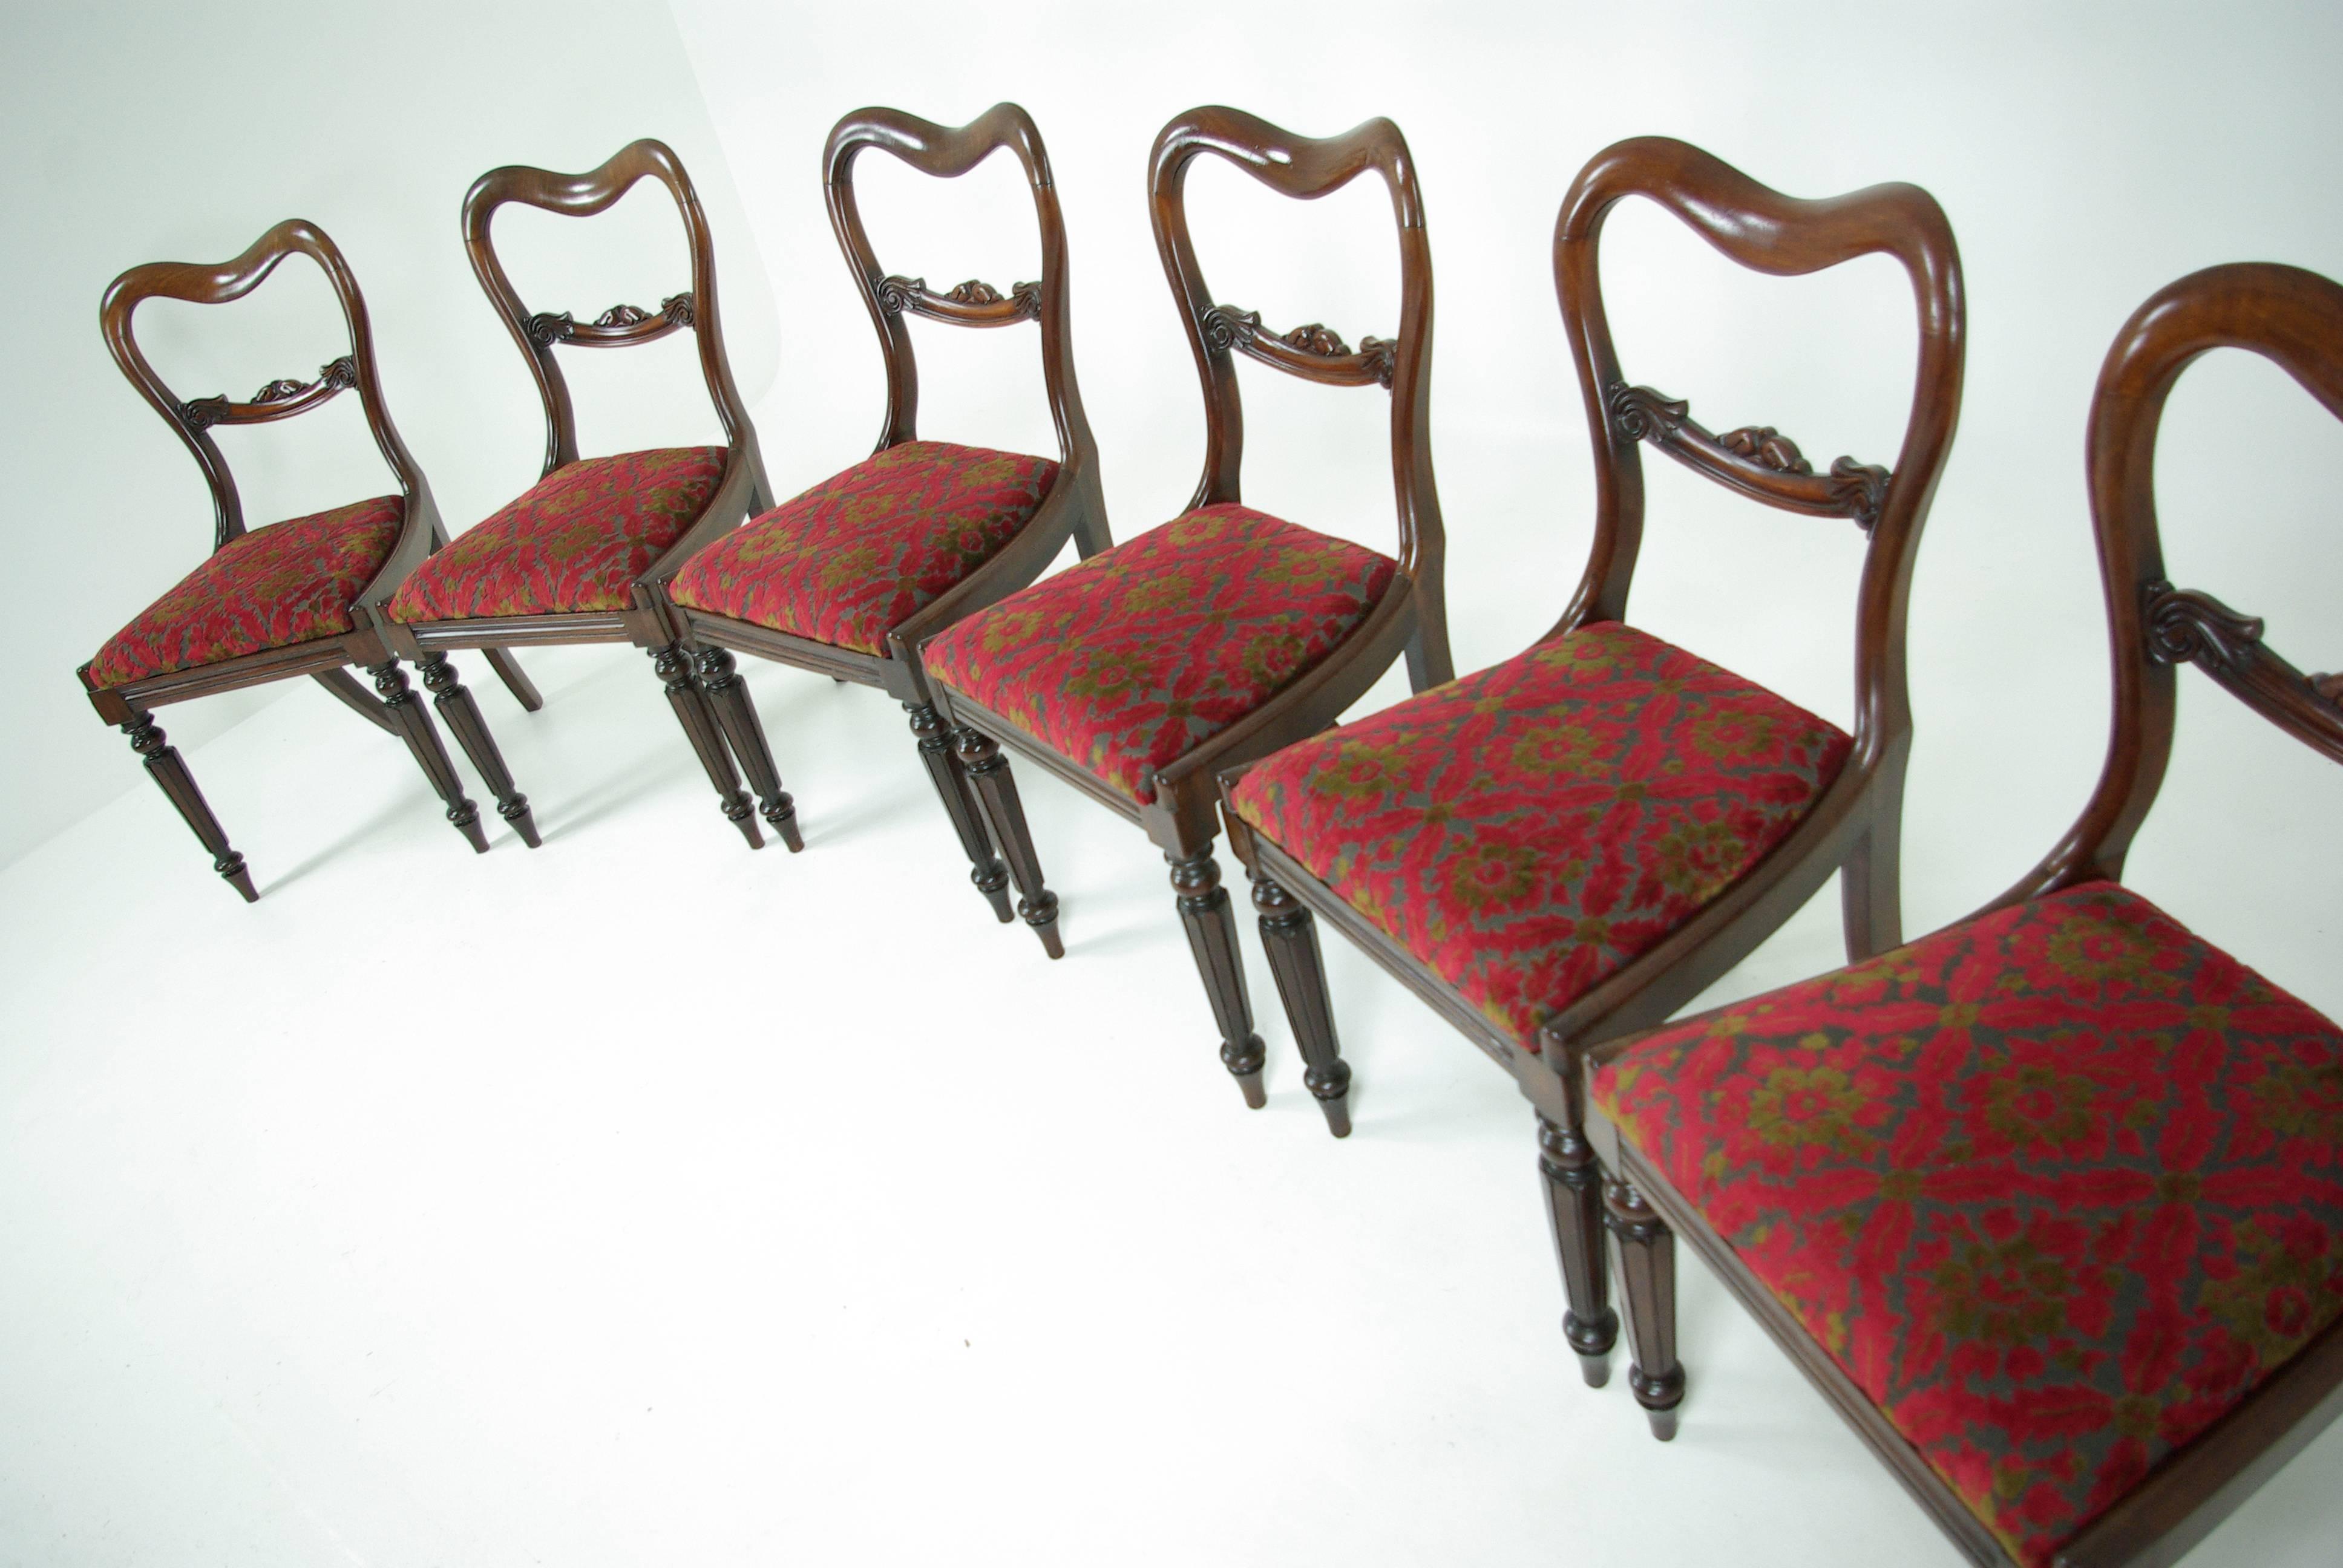 Antique Dining Chairs, Carved Backs, Set of Six, Regency, Liftout Seats, B607

Scotland.
1830.
Solid mahogany construction.
Original finish.
Carved centre railing.
Lift out seats.
Ending on tapered legs.
Lovely color and all joints are tight.

Was